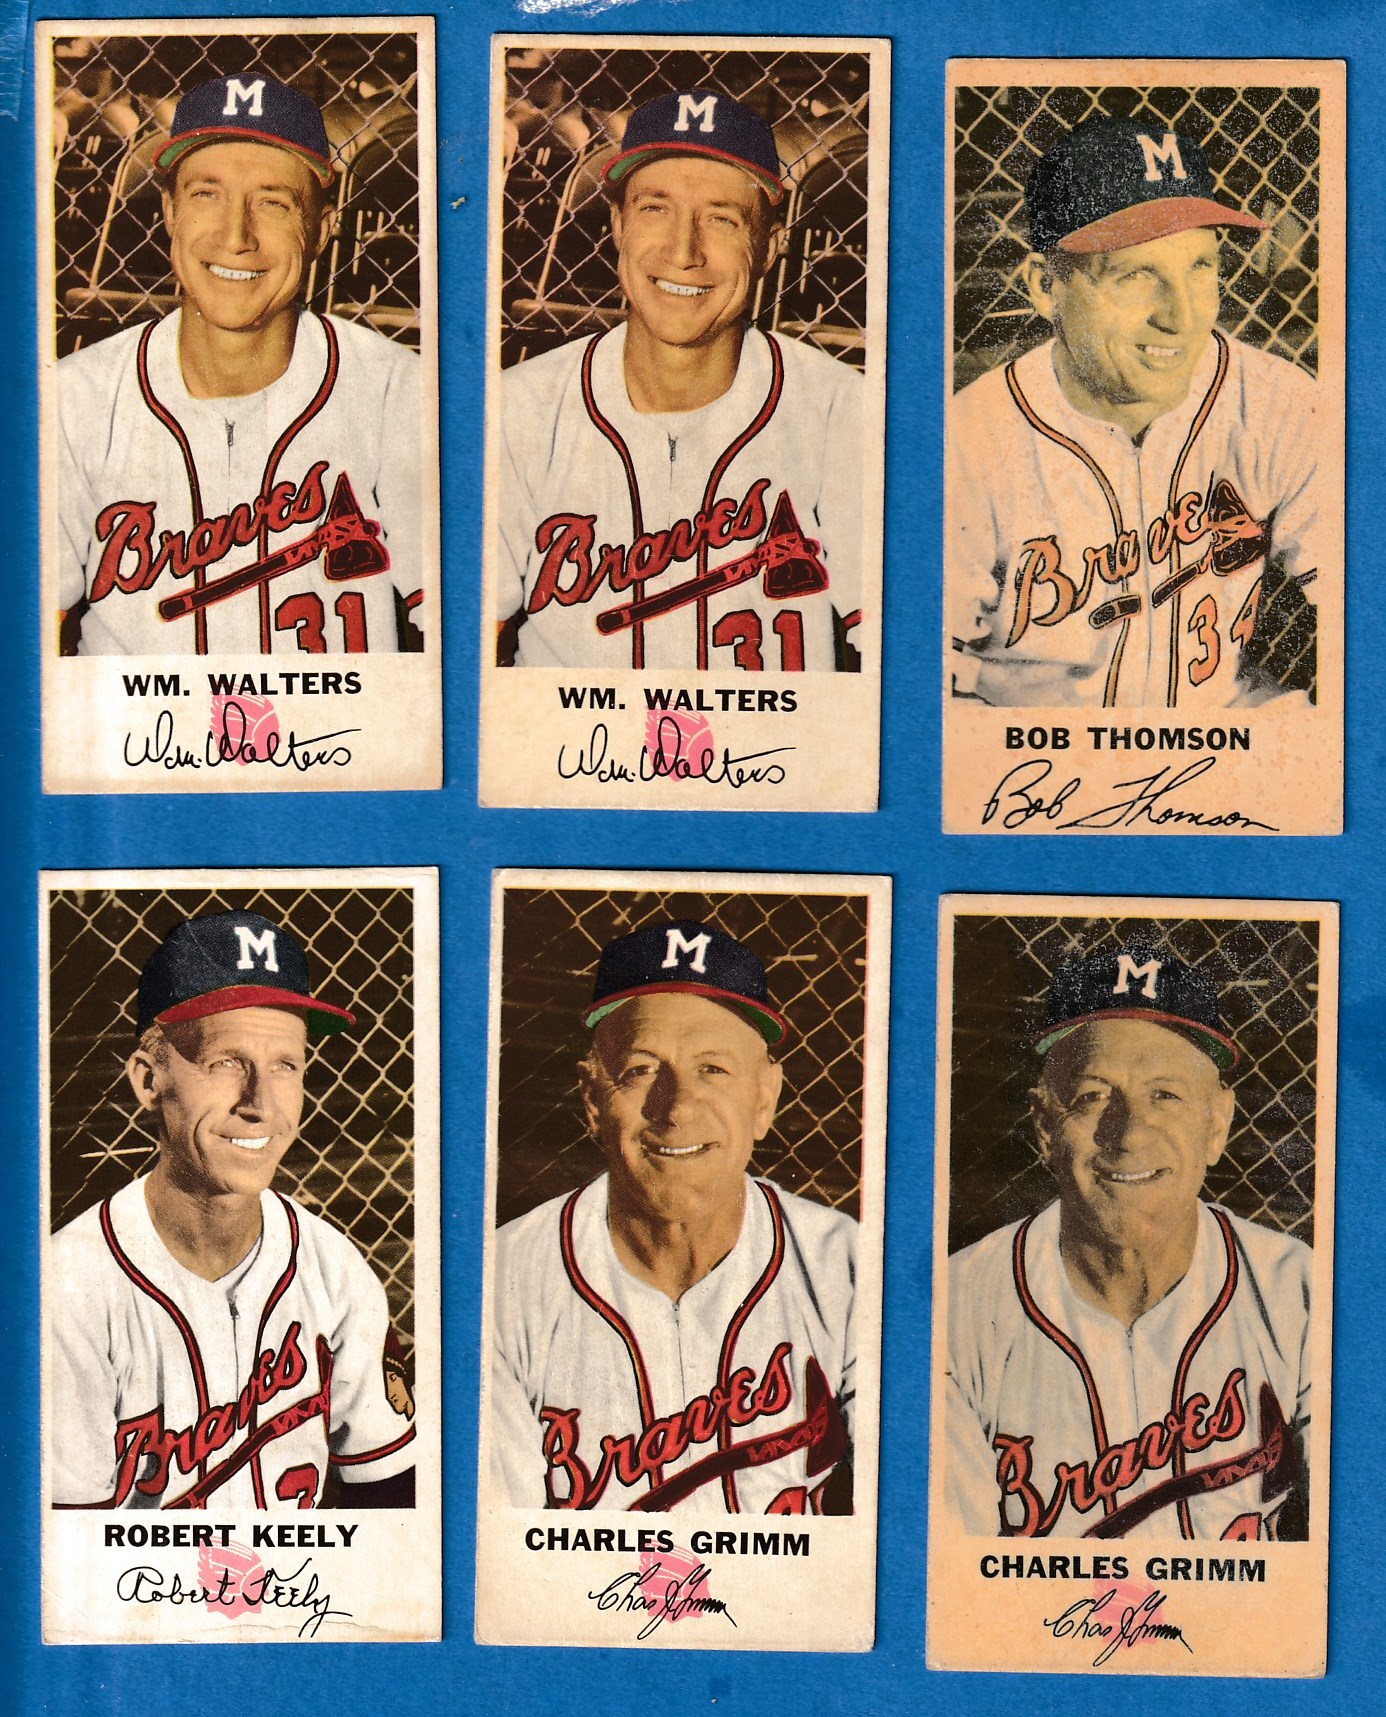 1954 Johnston Cookies #31 Bucky Walters COACH (Braves) Baseball cards value